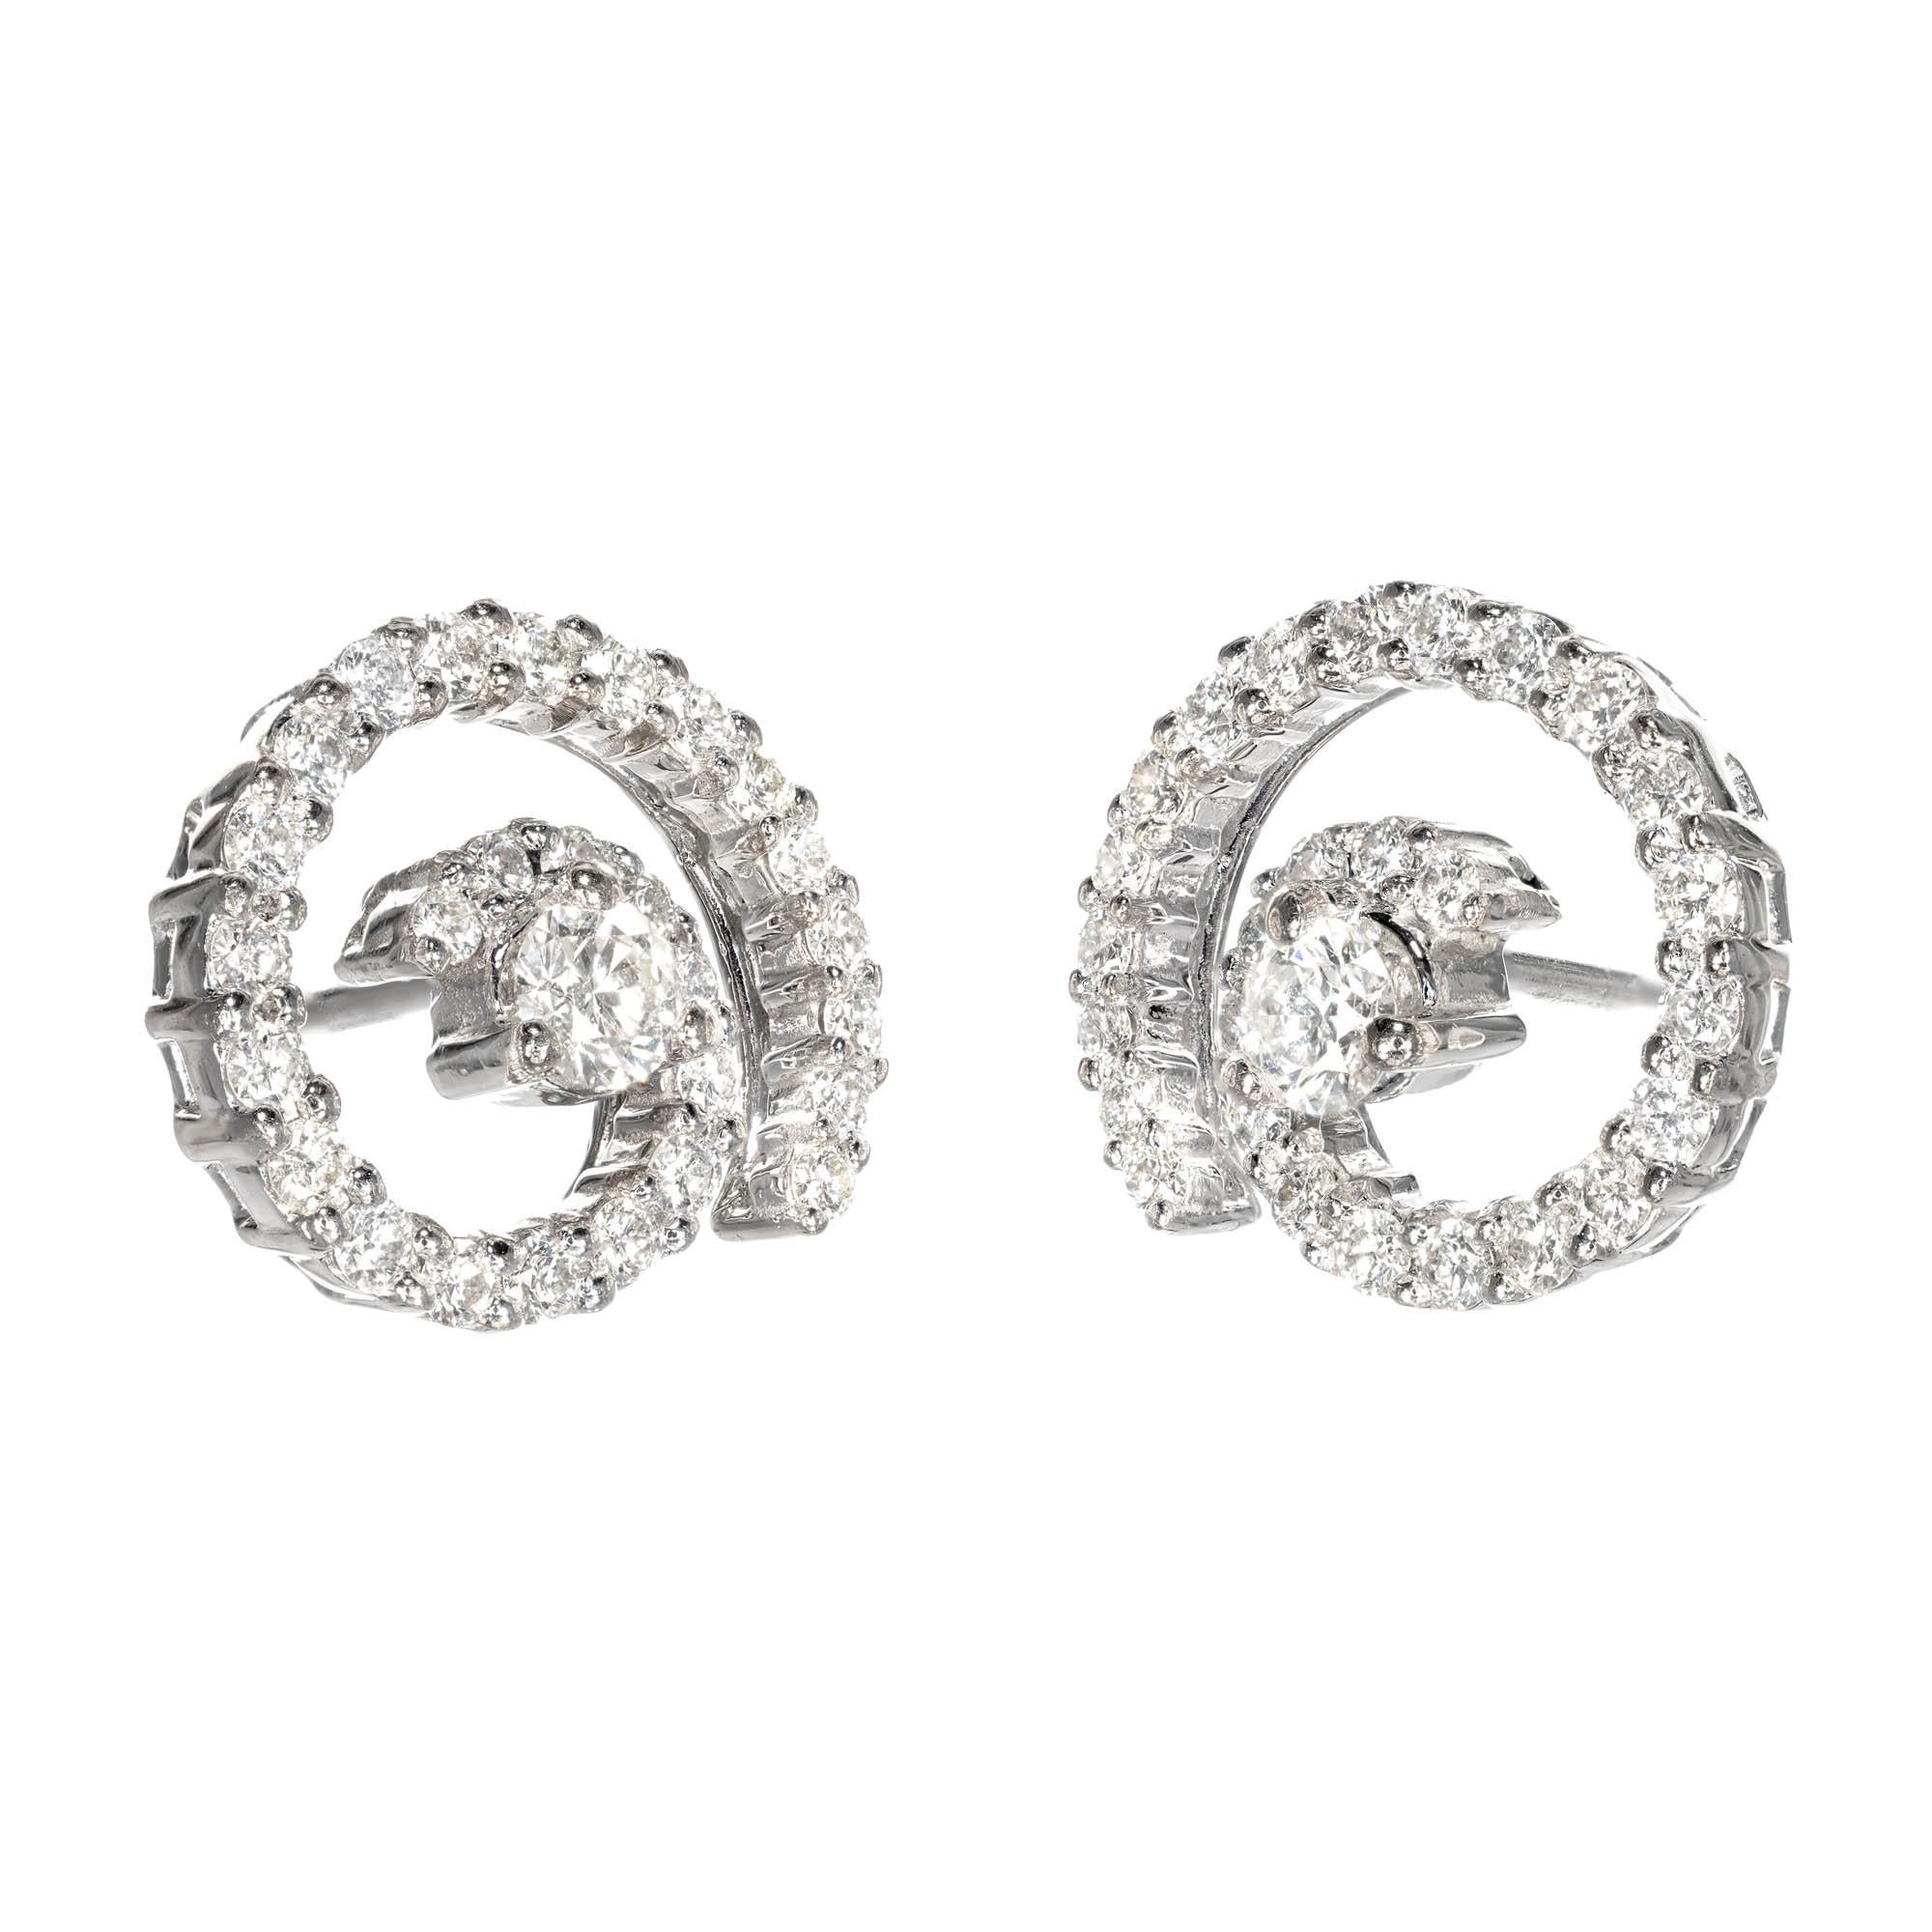 18k white gold Diamond earrings with center Diamond stud set in white gold and surrounded by an open swirl of Diamonds.

2 round brilliant cut Diamonds, approx. total weight .18cts, G – H, VS, 2.9mm
54 round brilliant cut Diamonds, approx. total